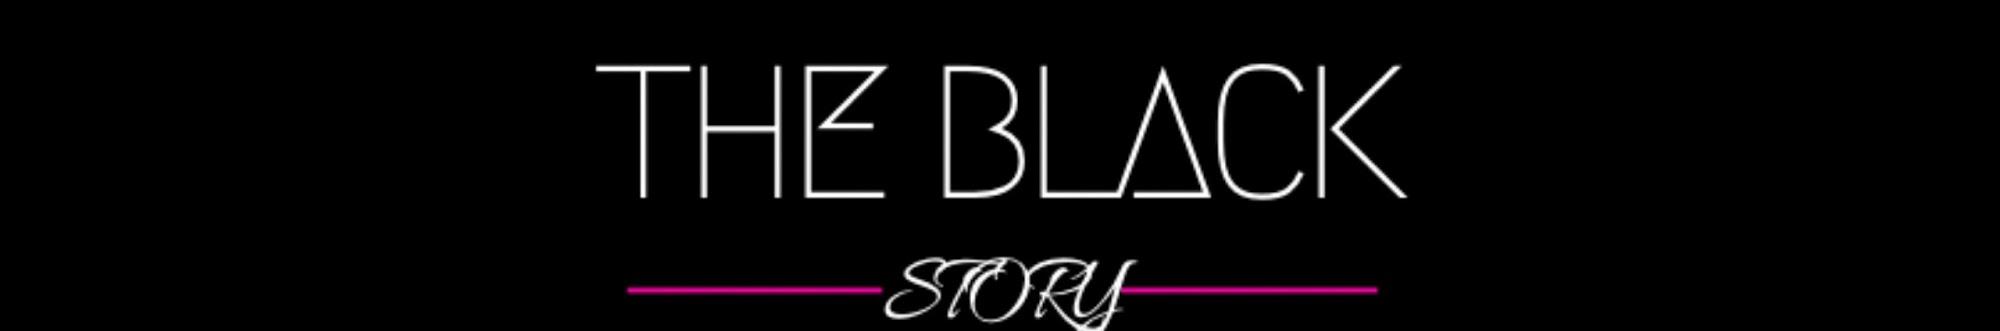 THE BLACK STORY